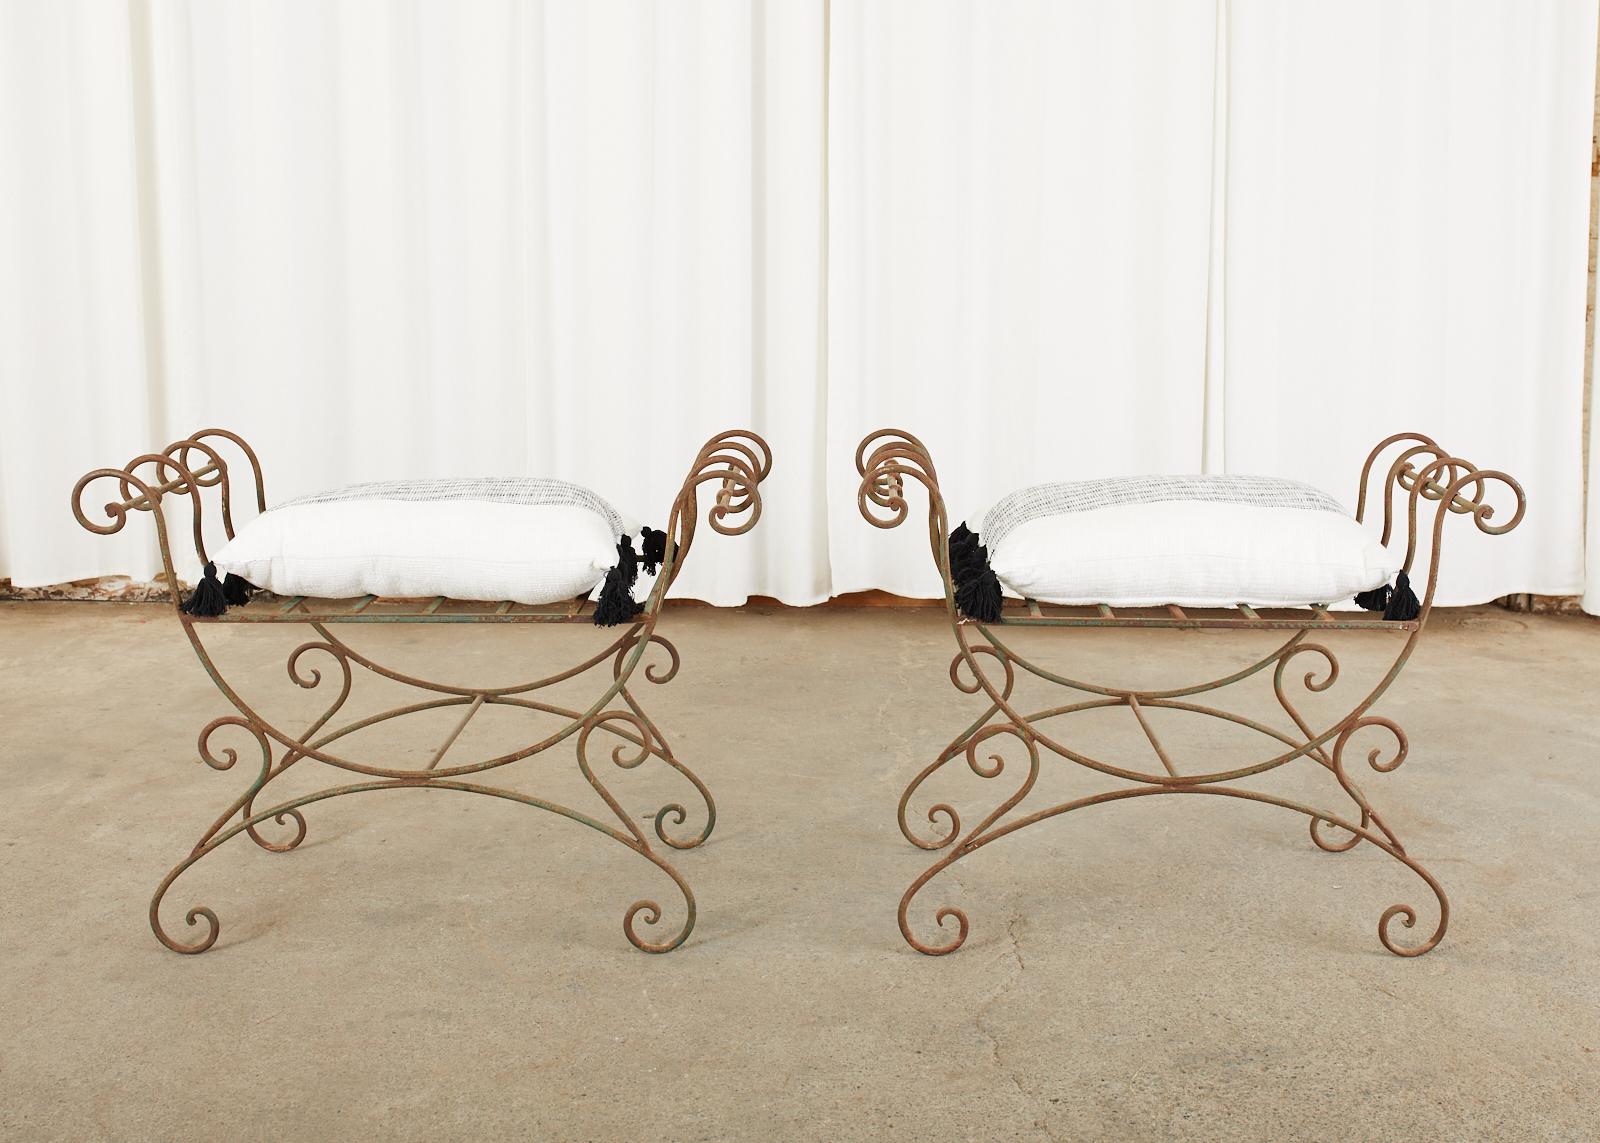 Stylish pair of Hollywood Regency wrought iron curule benches made in the neoclassical taste. Featuring an X-form design with scrolled arms and feet. The seats measure 25 inches wide and 18 inches deep. The wrought iron has a rich patinated metal